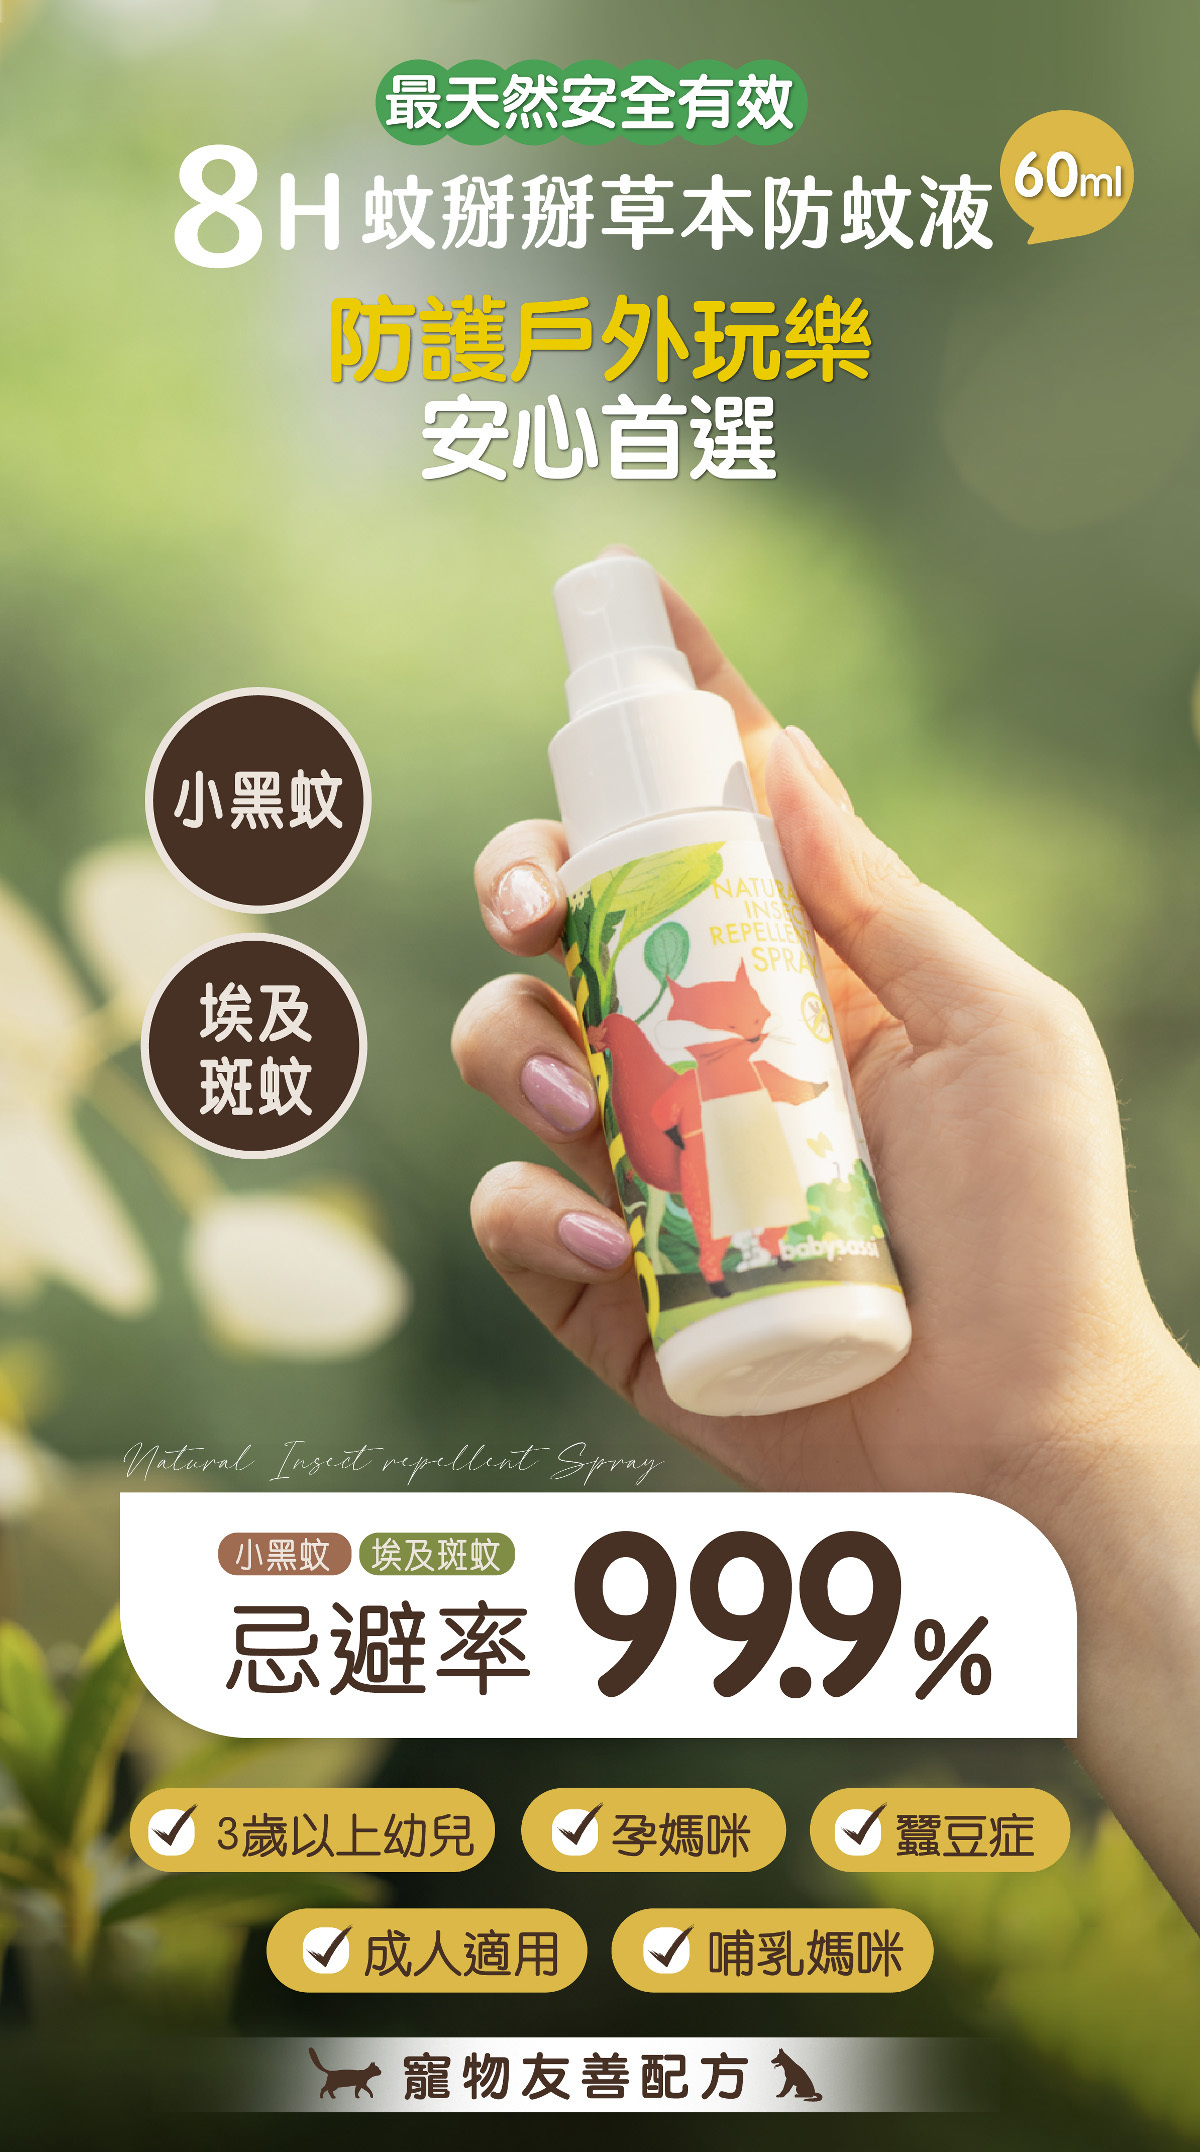 Natural Insect Repellent Spray 04